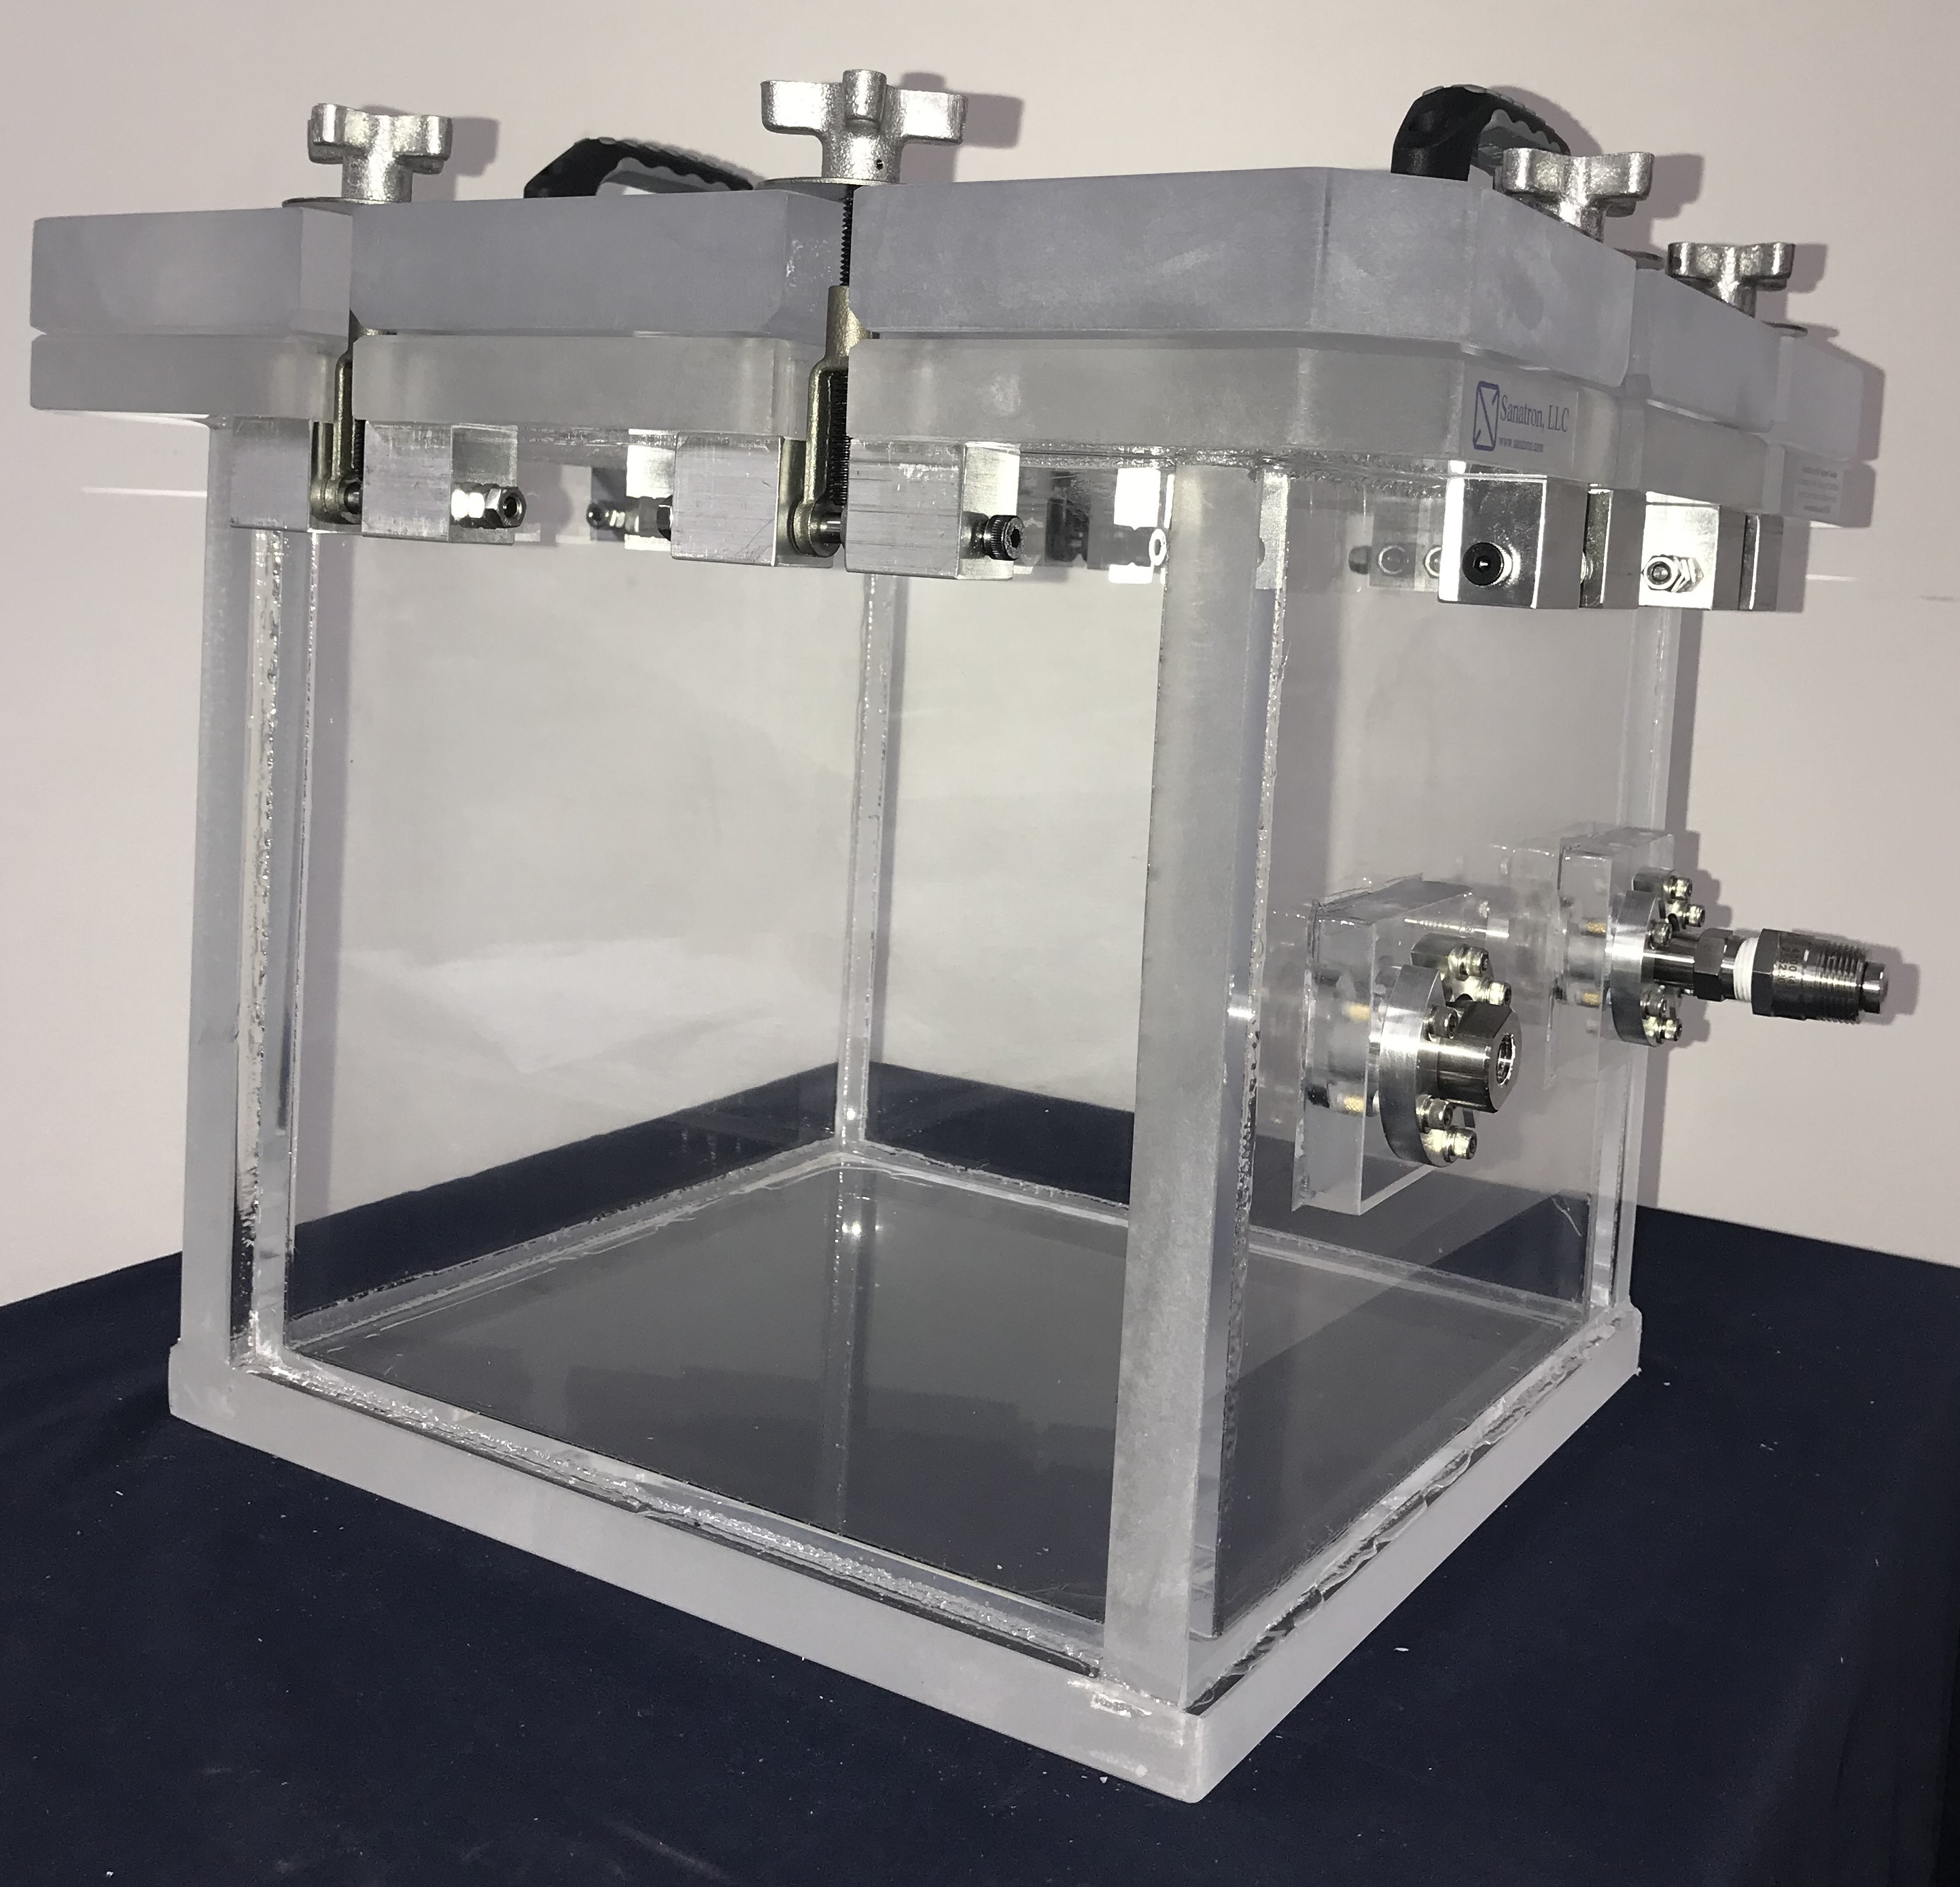 https://www.sanatron.com/products/images-psi/clear-acrylic-pressure-and-vacuum-box-used-in-calibration-labs.jpg